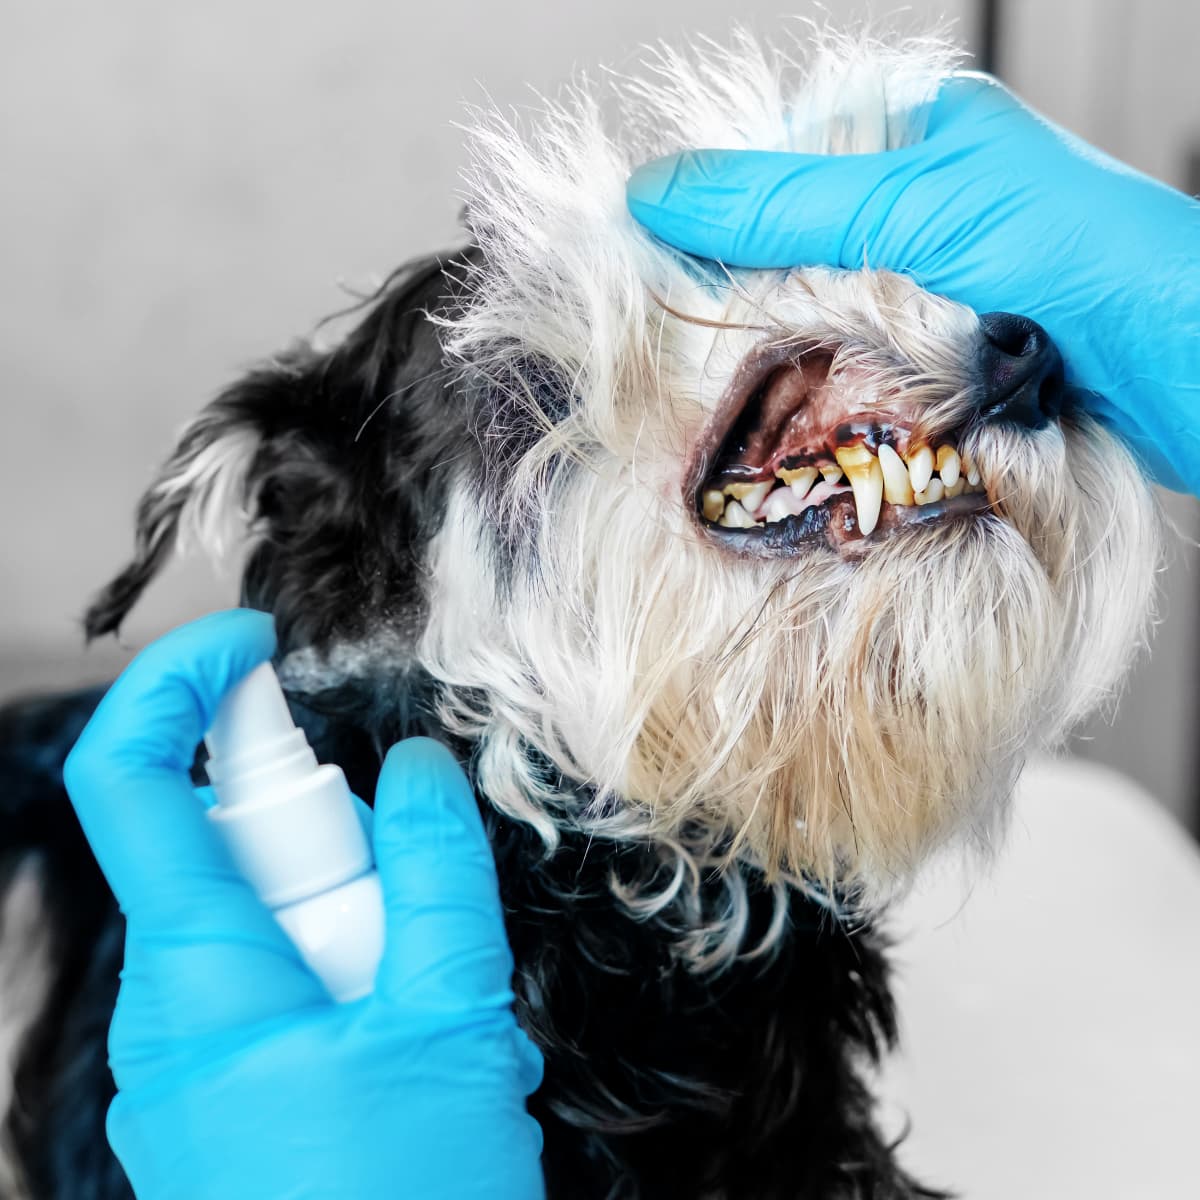 how safe is dog teeth cleaning